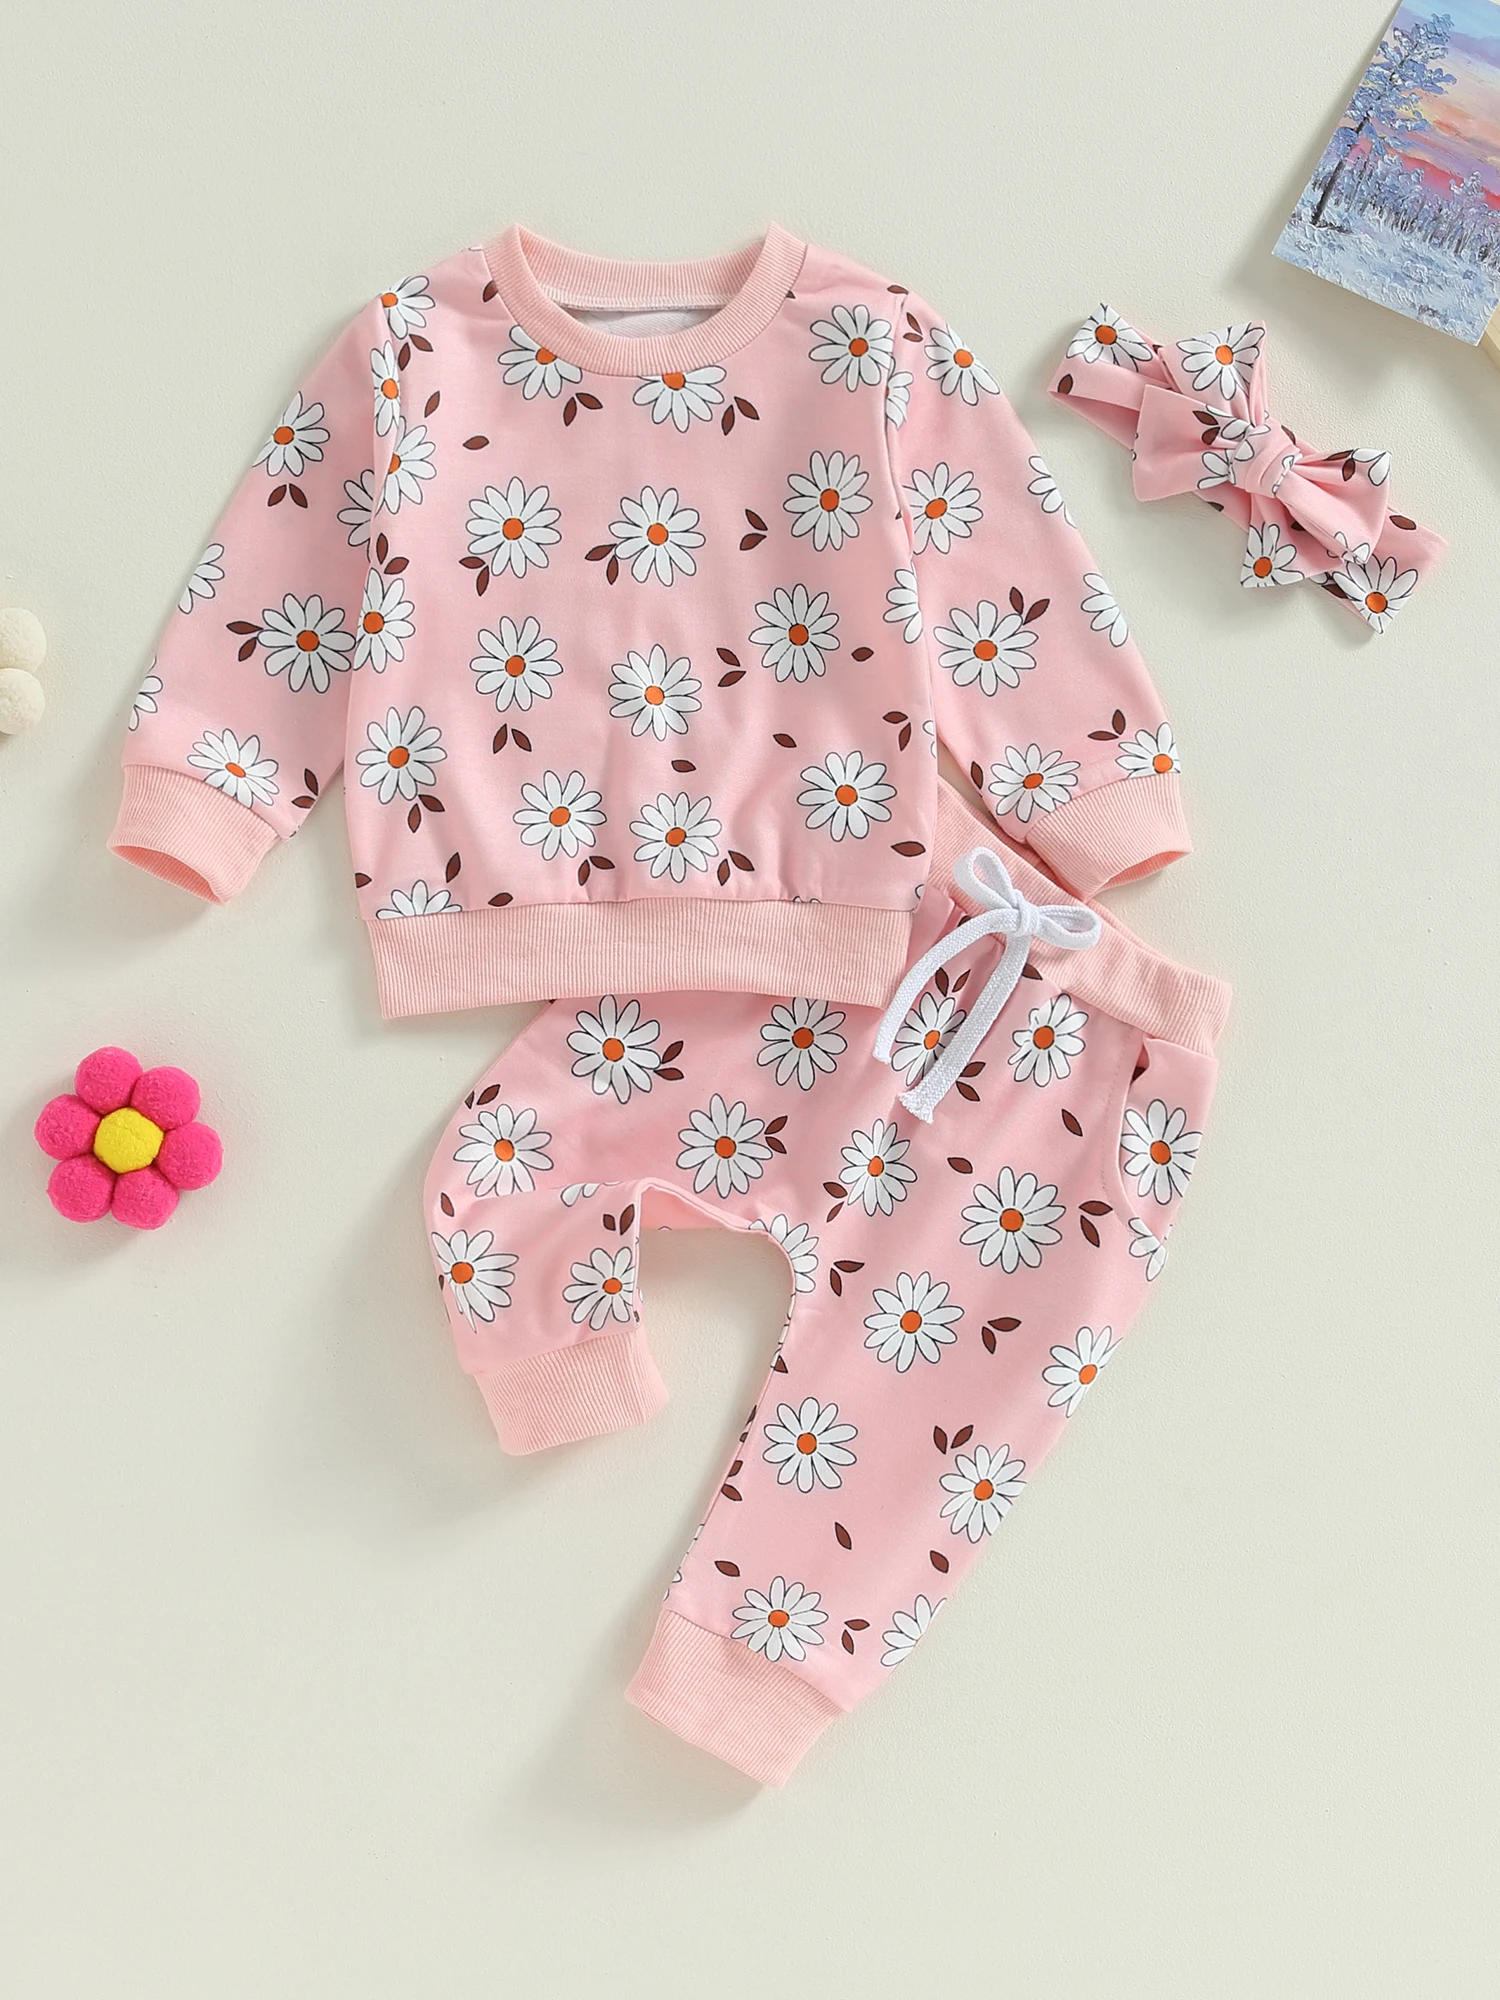 

Adorable Floral Fall Outfit for Baby Girls - Long Sleeve Crew Neck Sweatshirts and Pants Set in Sizes 3-24 Months - Perfect